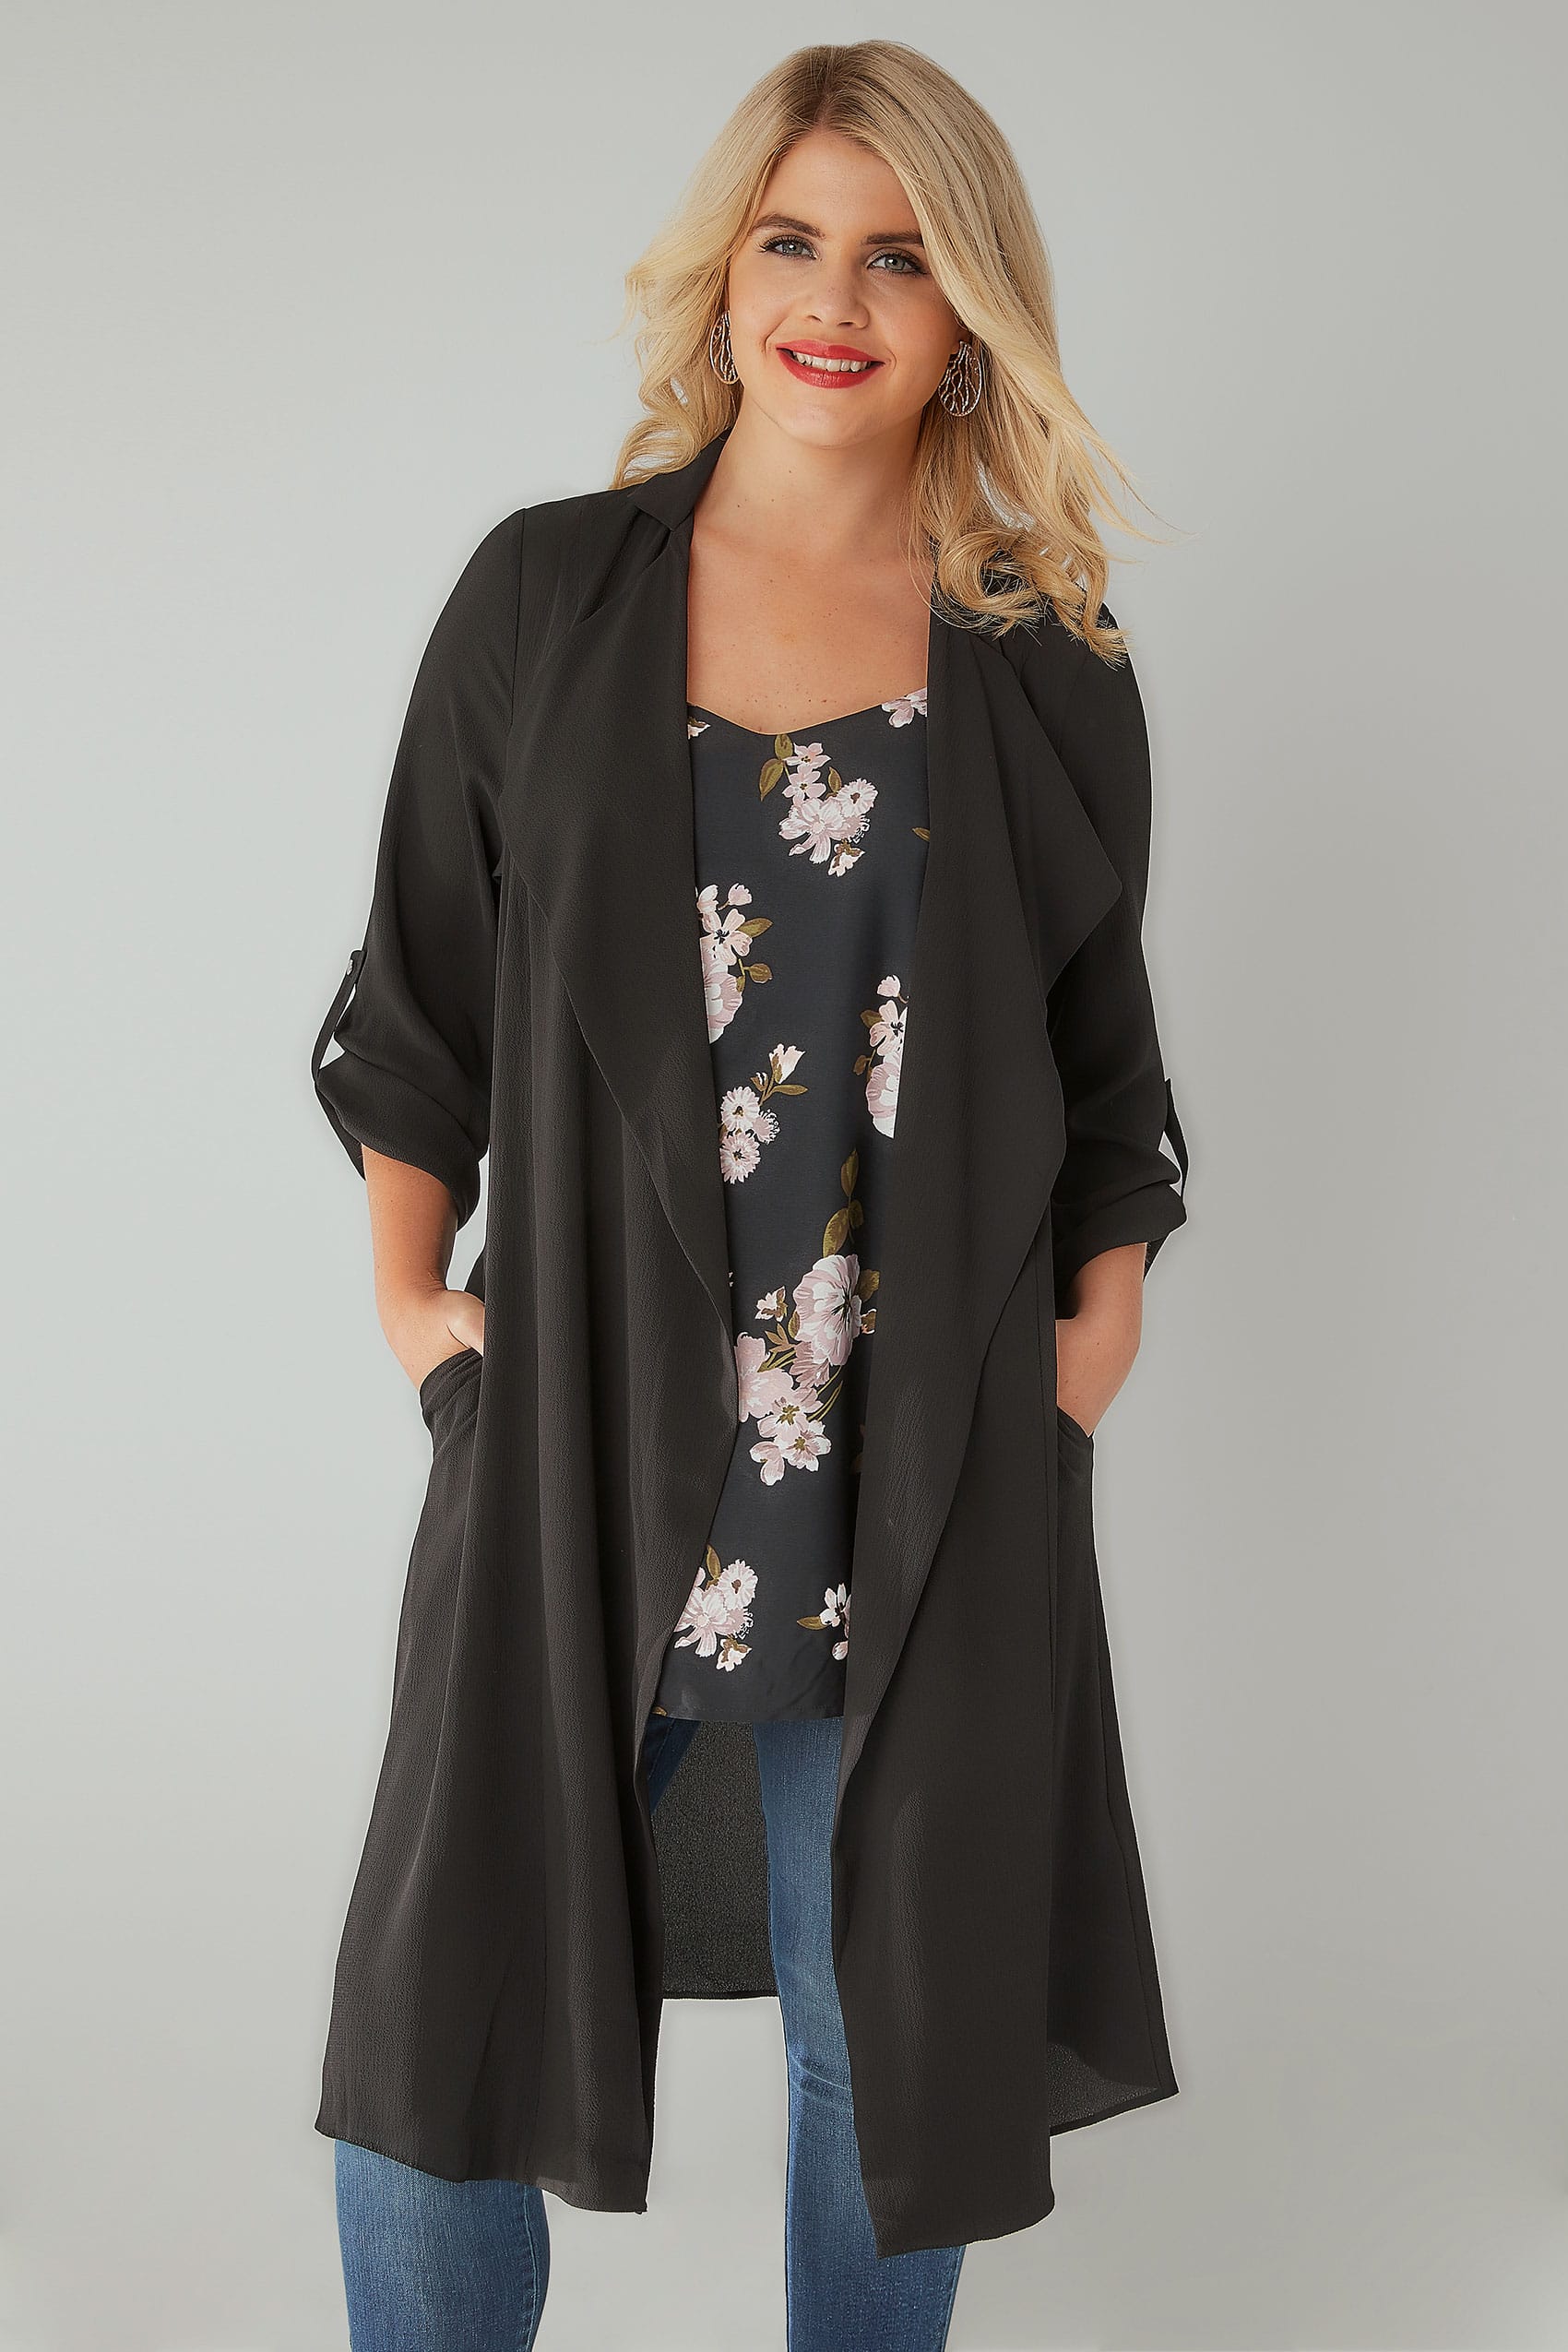 Black Lightweight Duster Jacket With Waterfall Front, Plus size 16 to 36